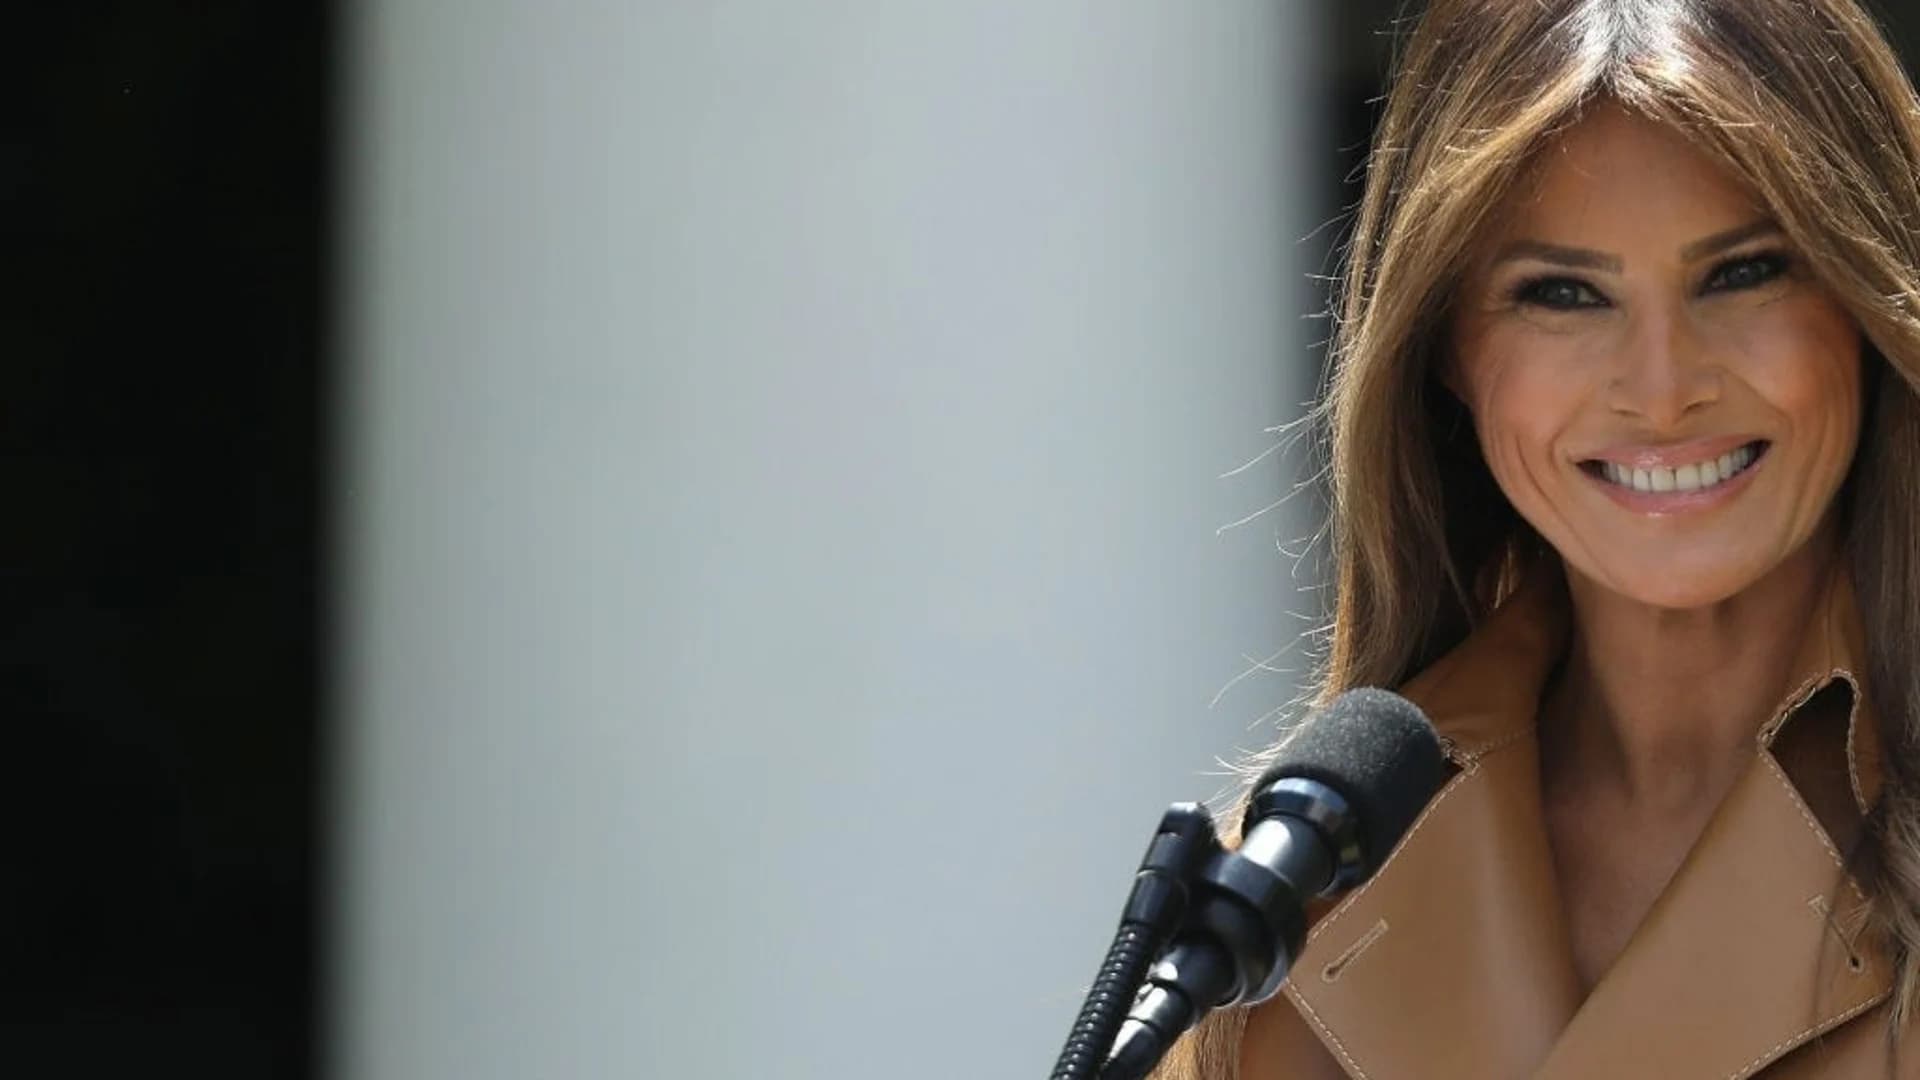 Melania Trump in hospital for treatment of kidney condition